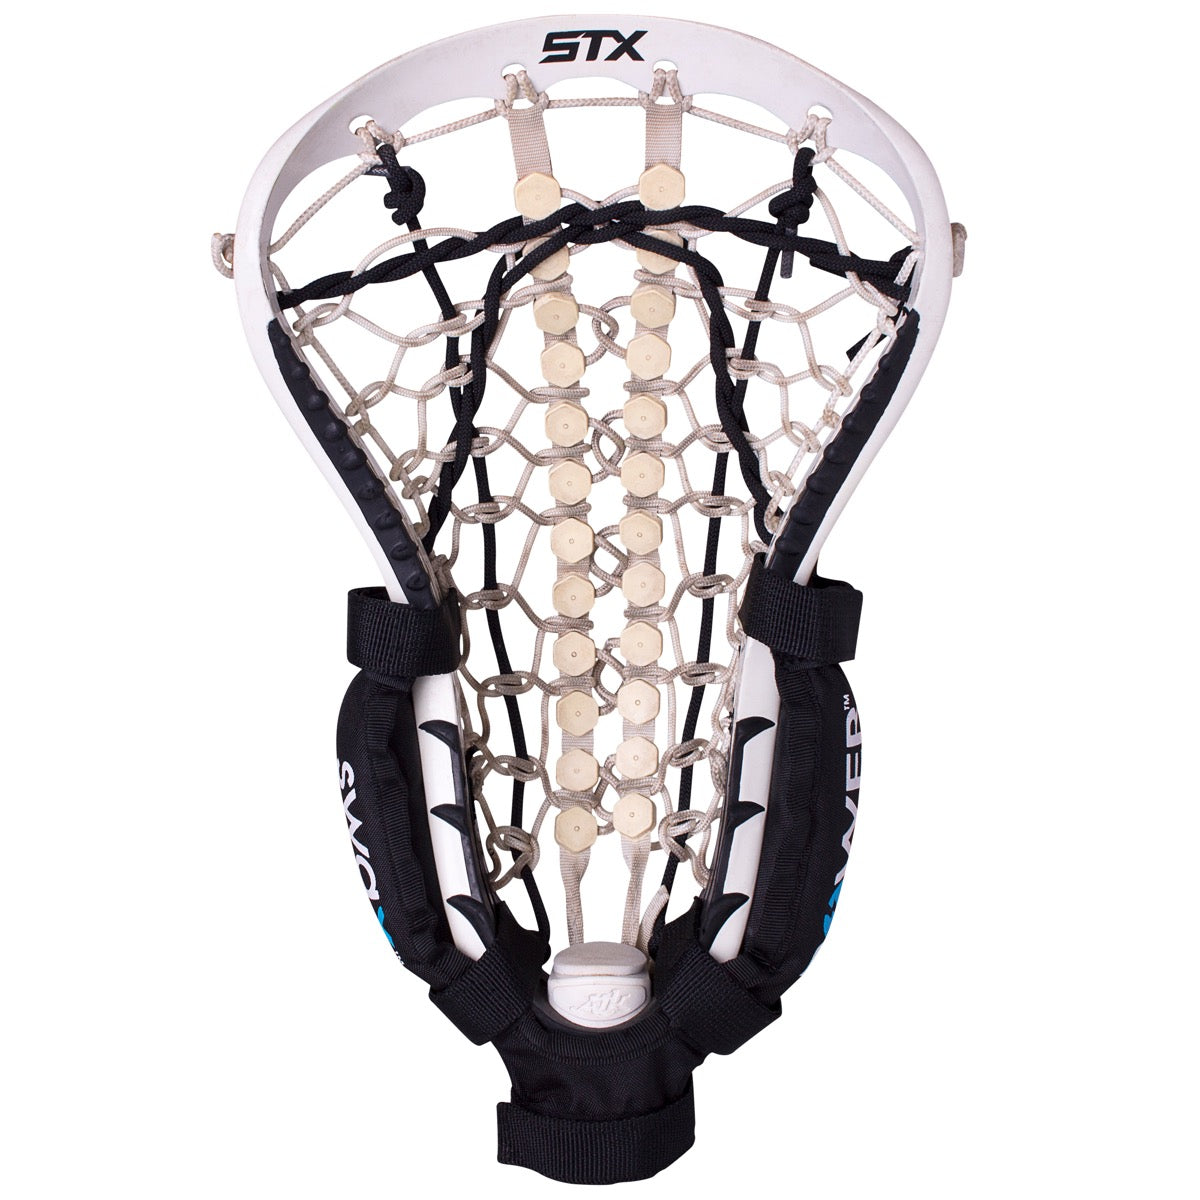 Swax Lax Power Weights shown on girls lacrosse stick - front view